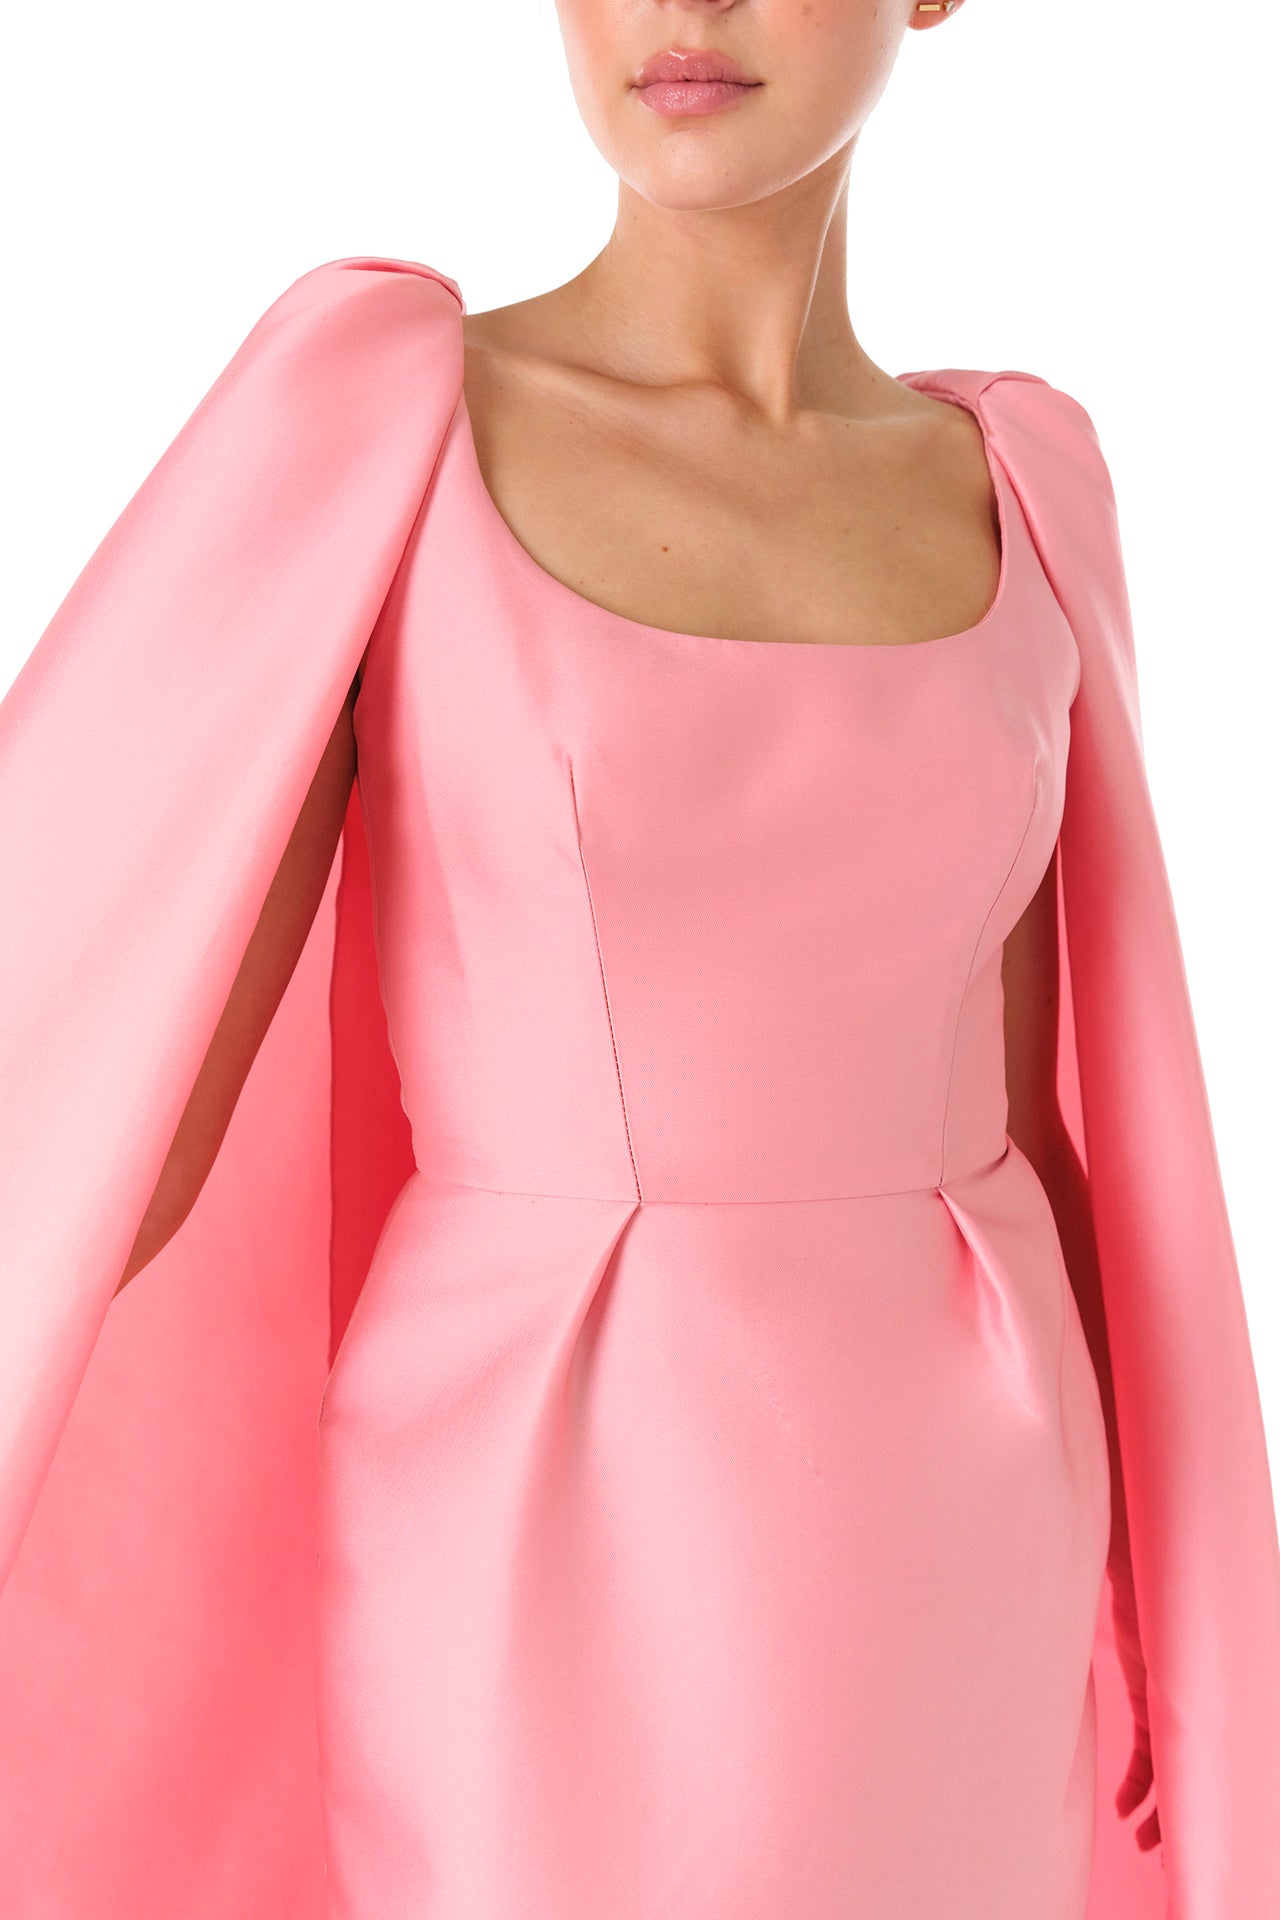 Monique Lhuillier Fall 2024 Dahlia pink mikado, sleeveless column gown with scoop neckline and attached cape - detail two.